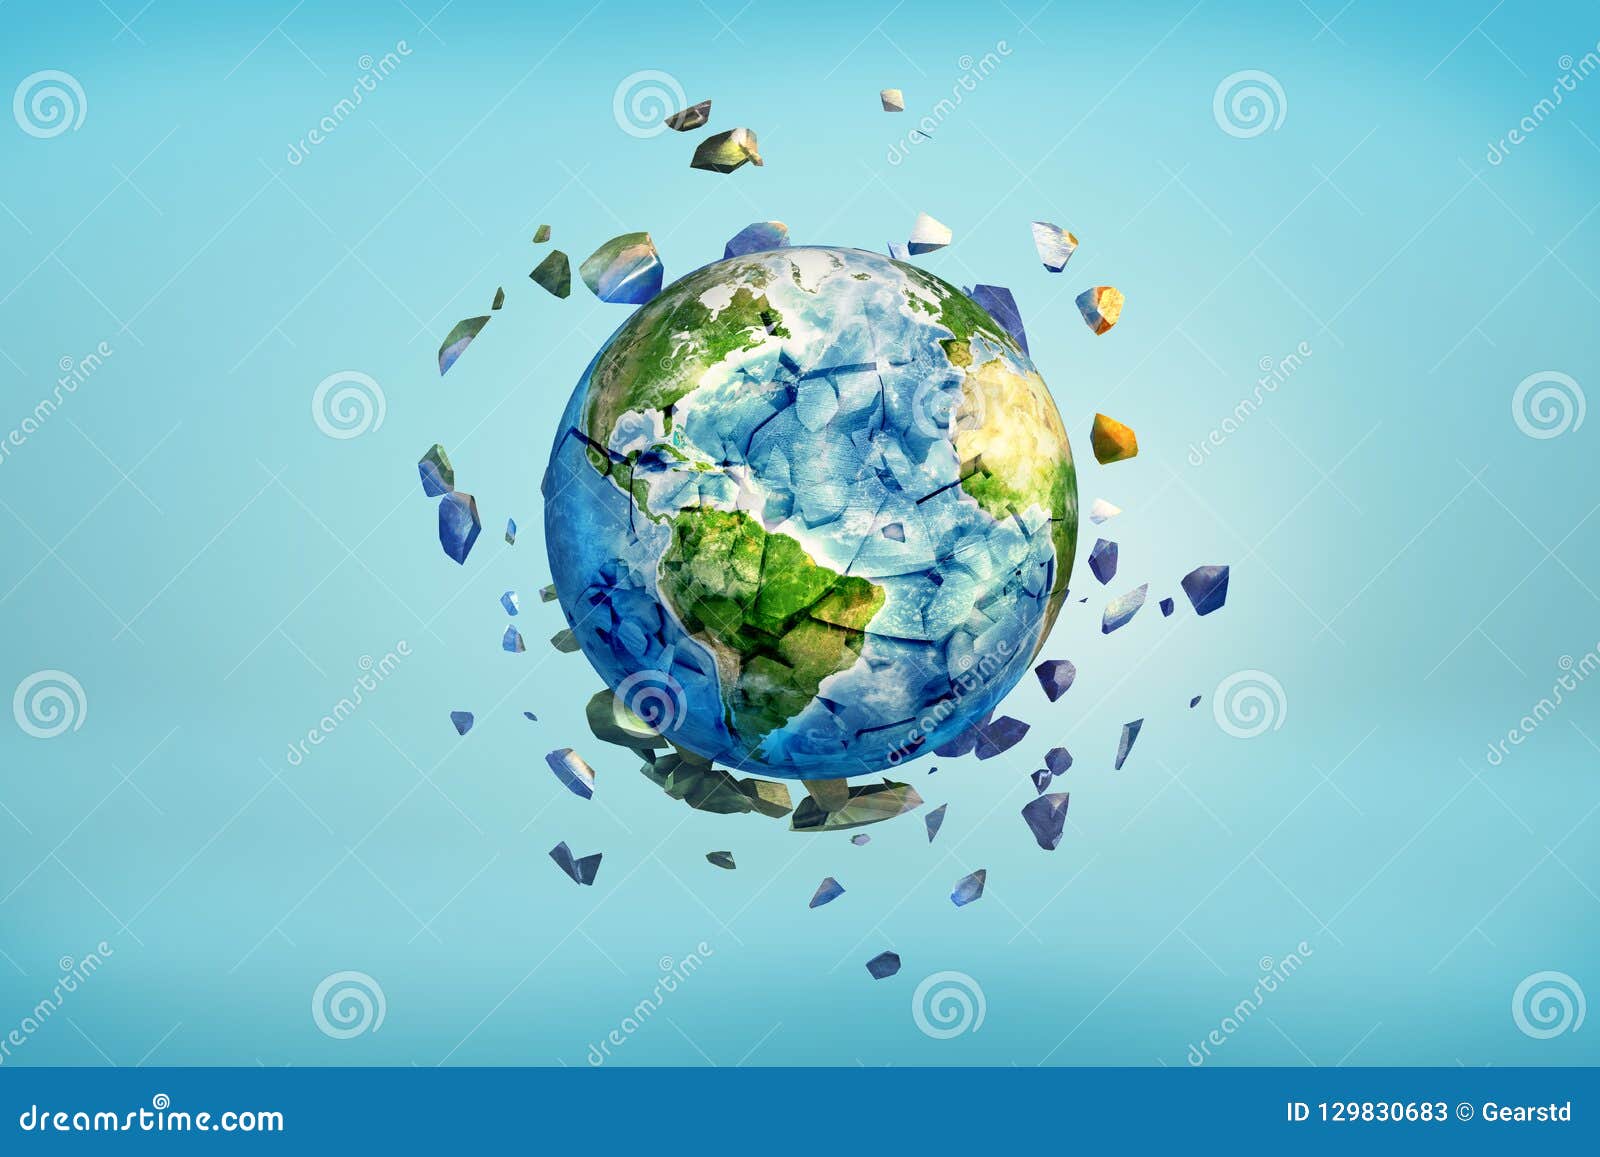 3d rendering of earth globe getting crushed into small pieces with the cracked parts flying away.